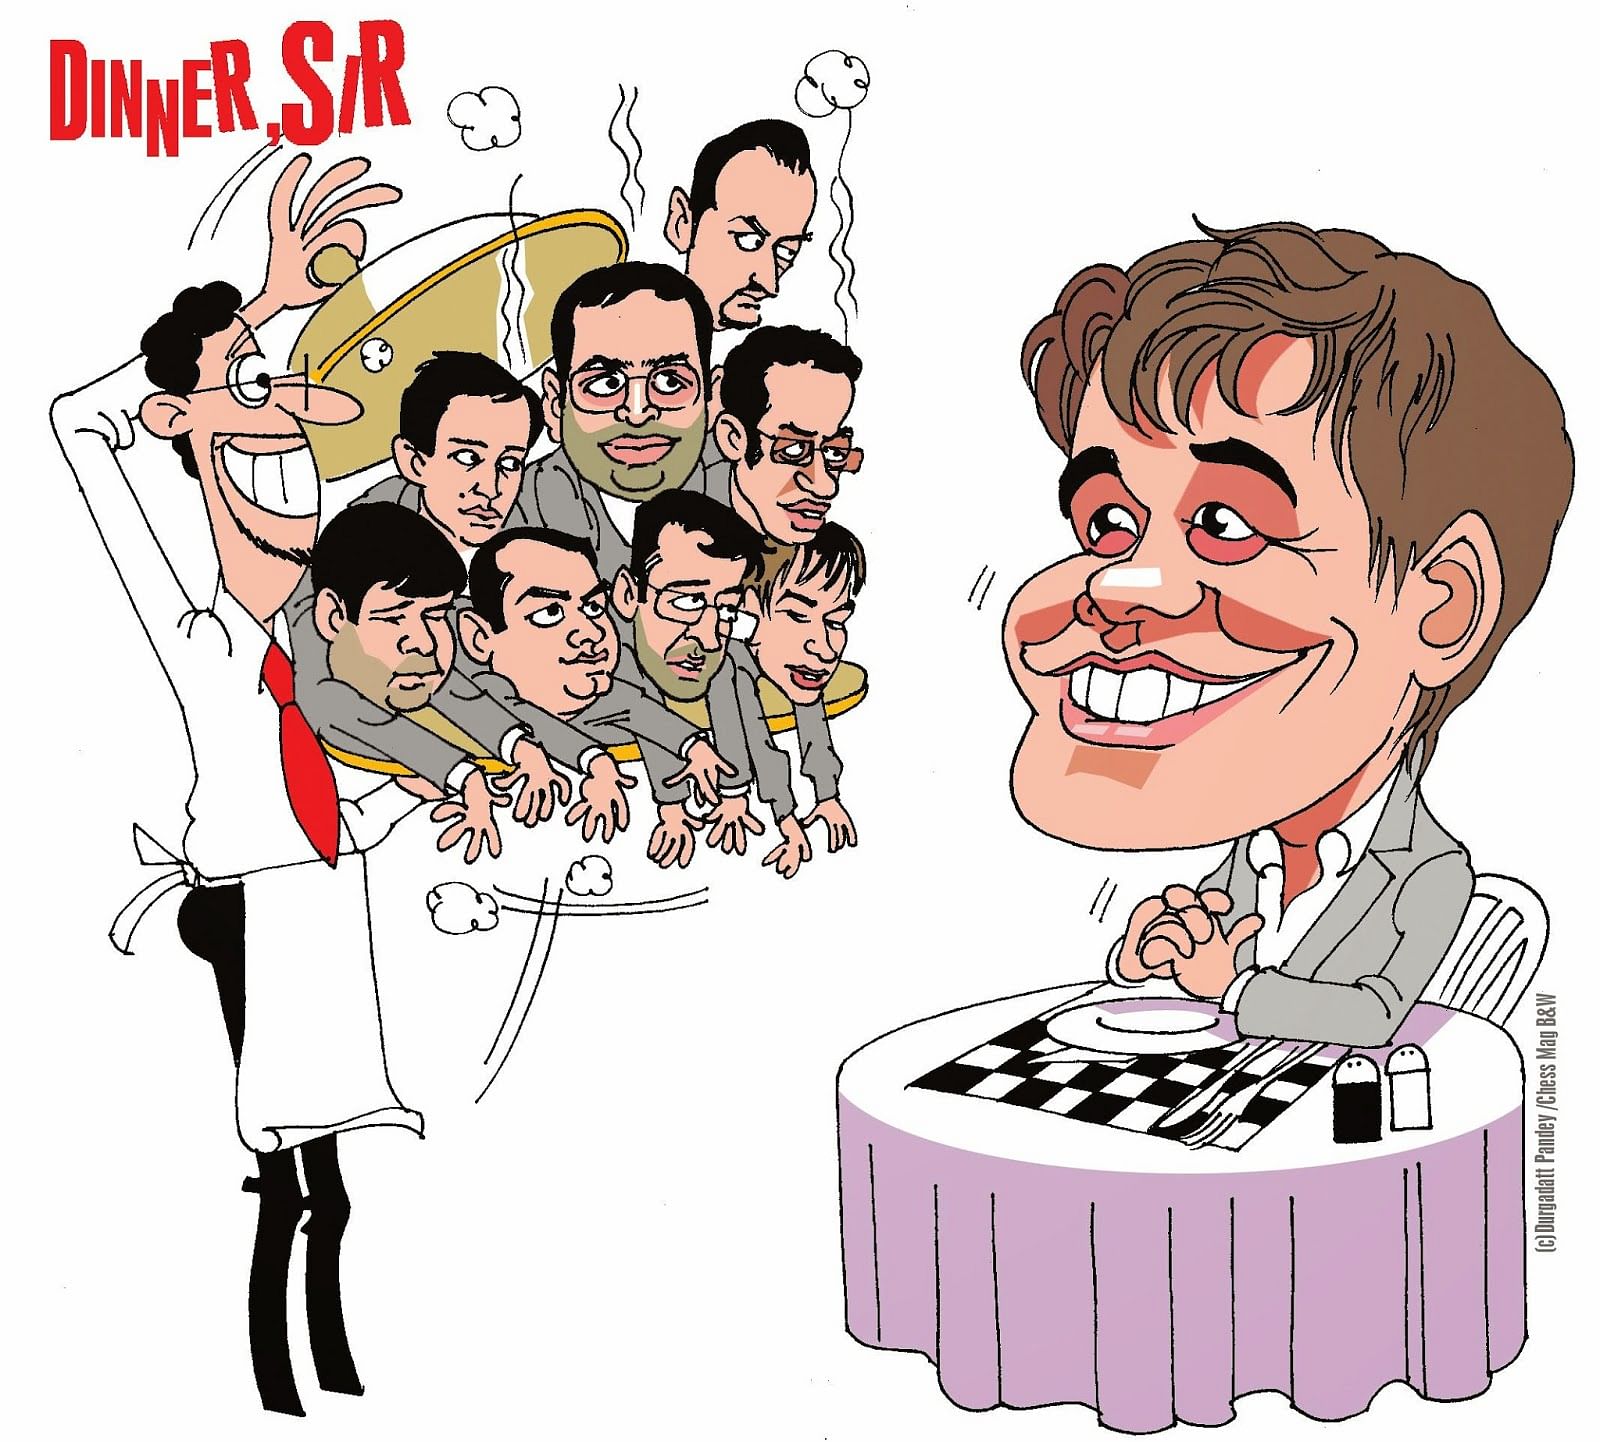 World Chess Candidates 2014 menu: What will Magnus Carlsen get for 'Dinner'  in November?